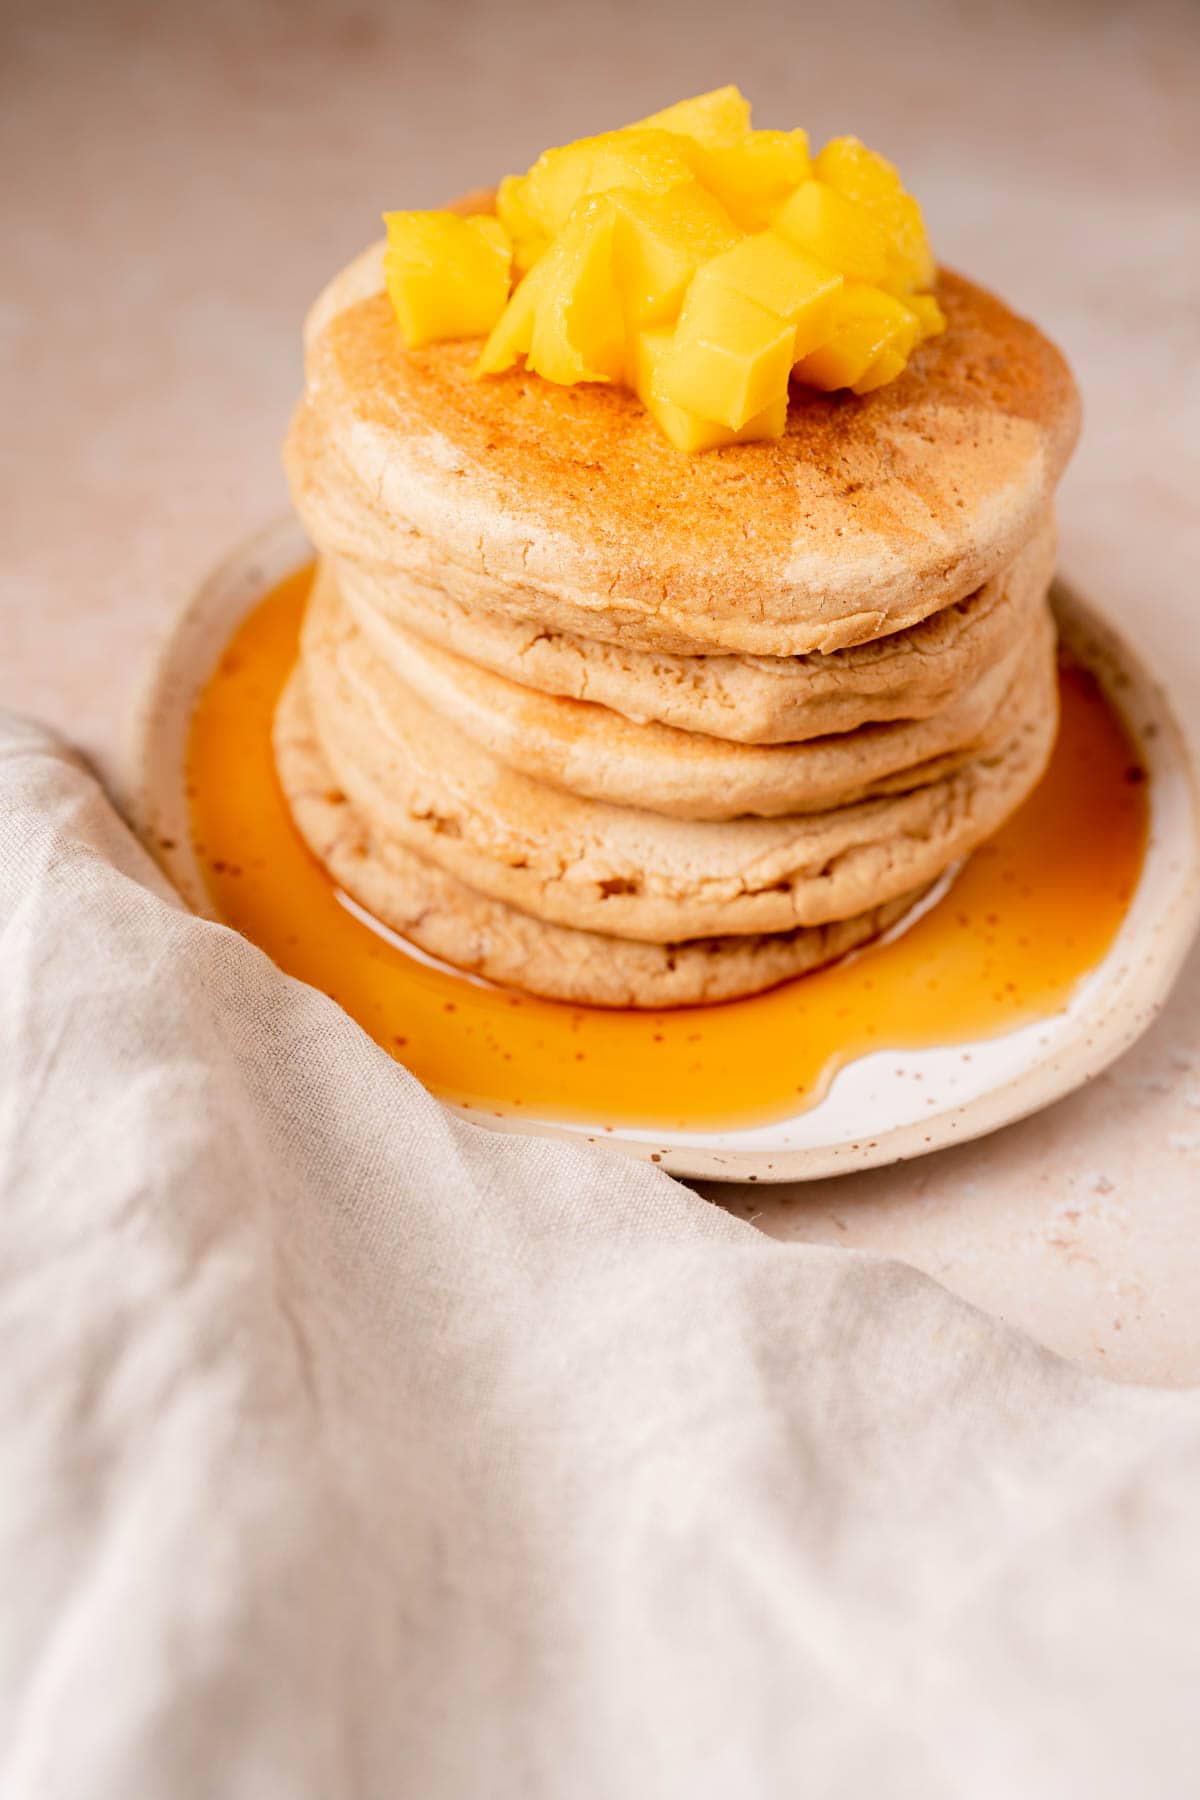 A stack of oat pancakes on a plate drizzled with syrup.